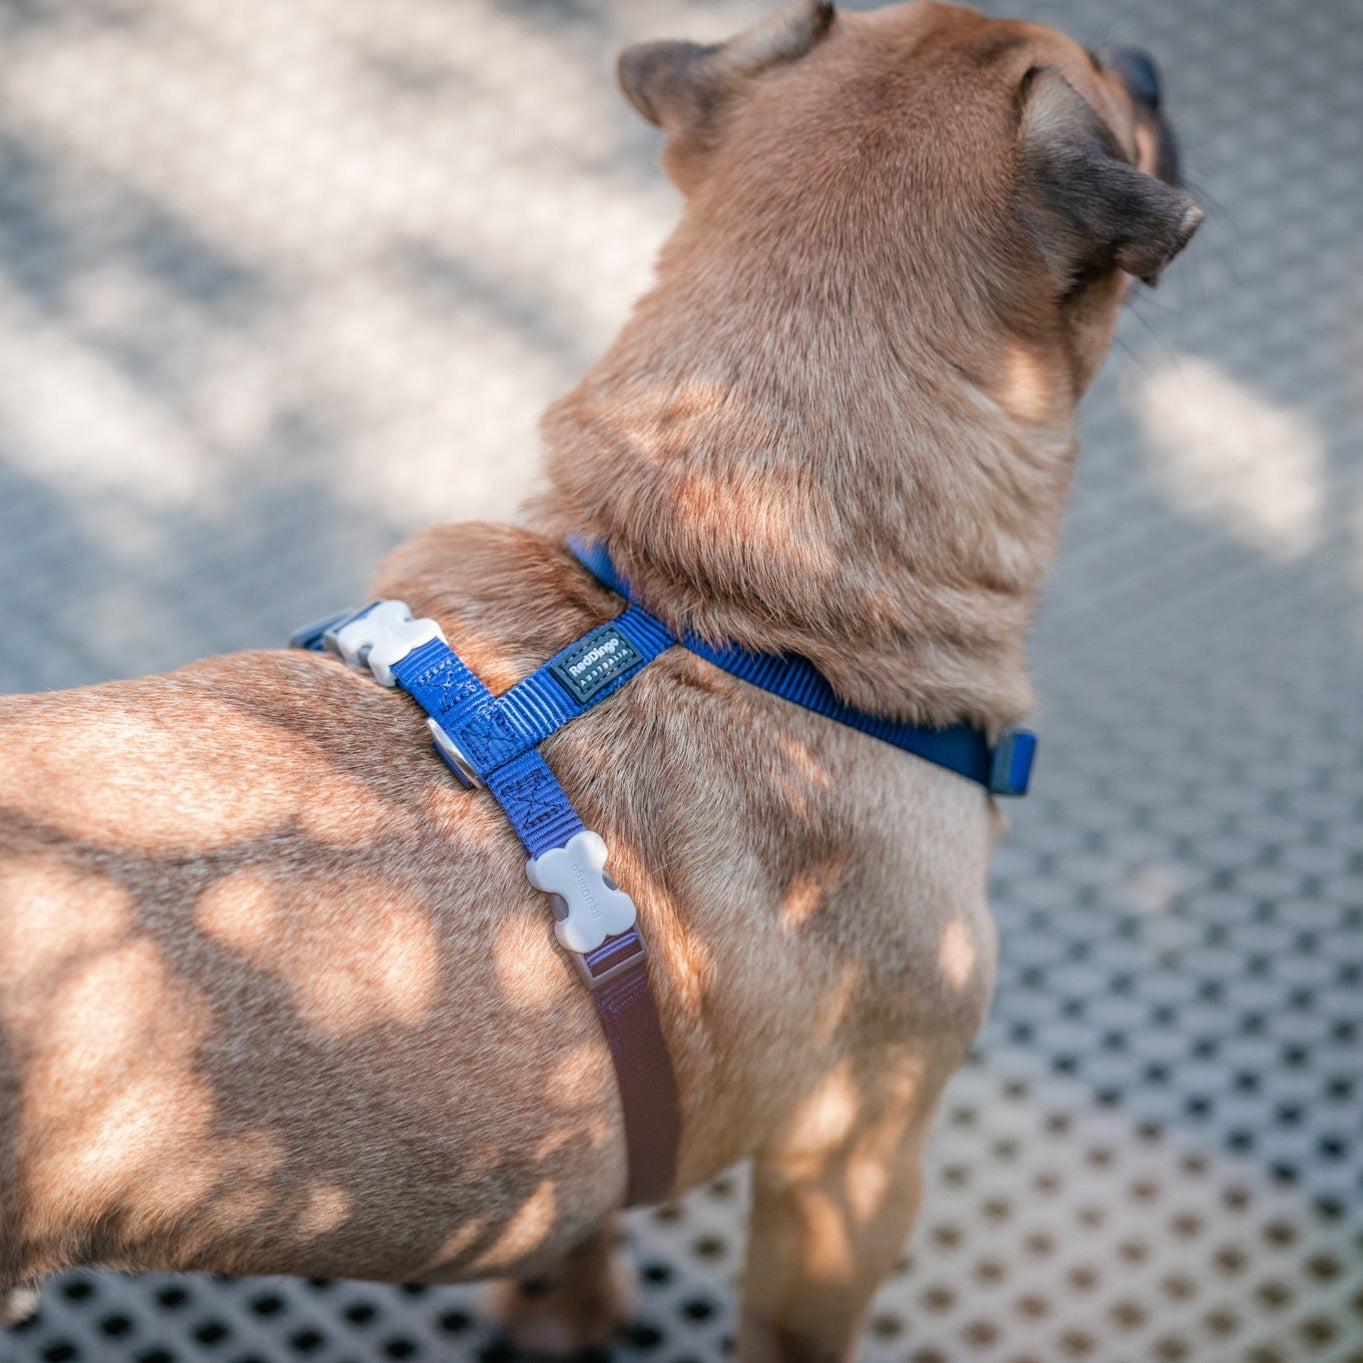 How to Put on a Top Paw Adjustable Harness